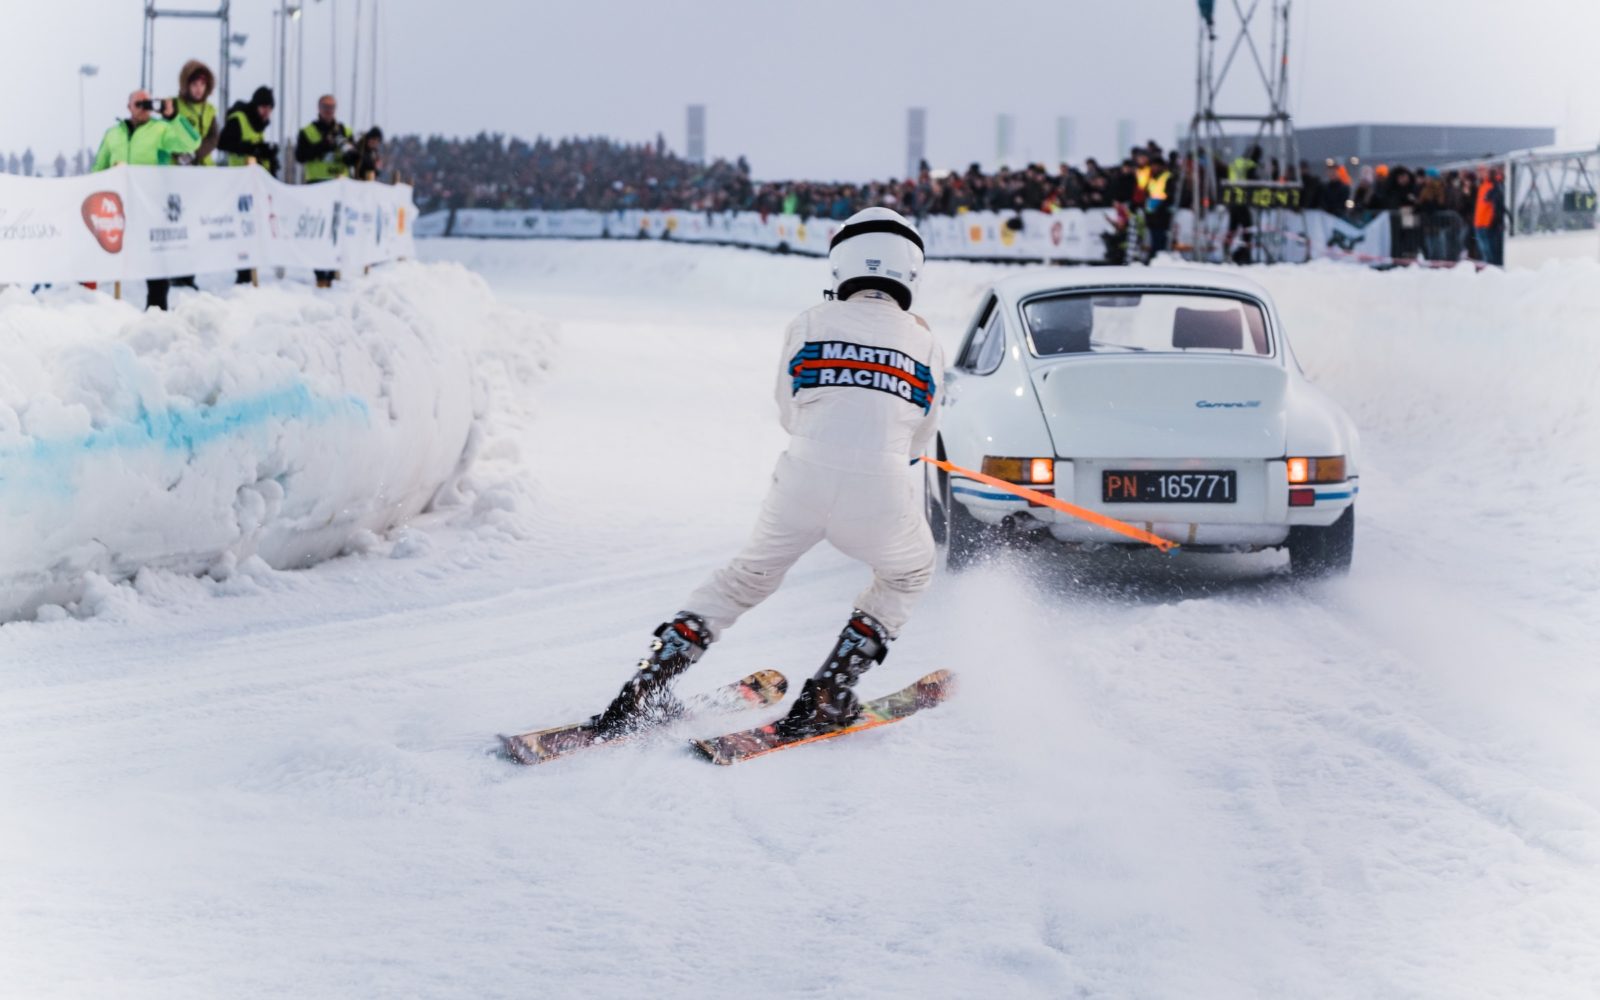 A Look At The Incredible GP Ice Race Would You Ski Behind A Race Car